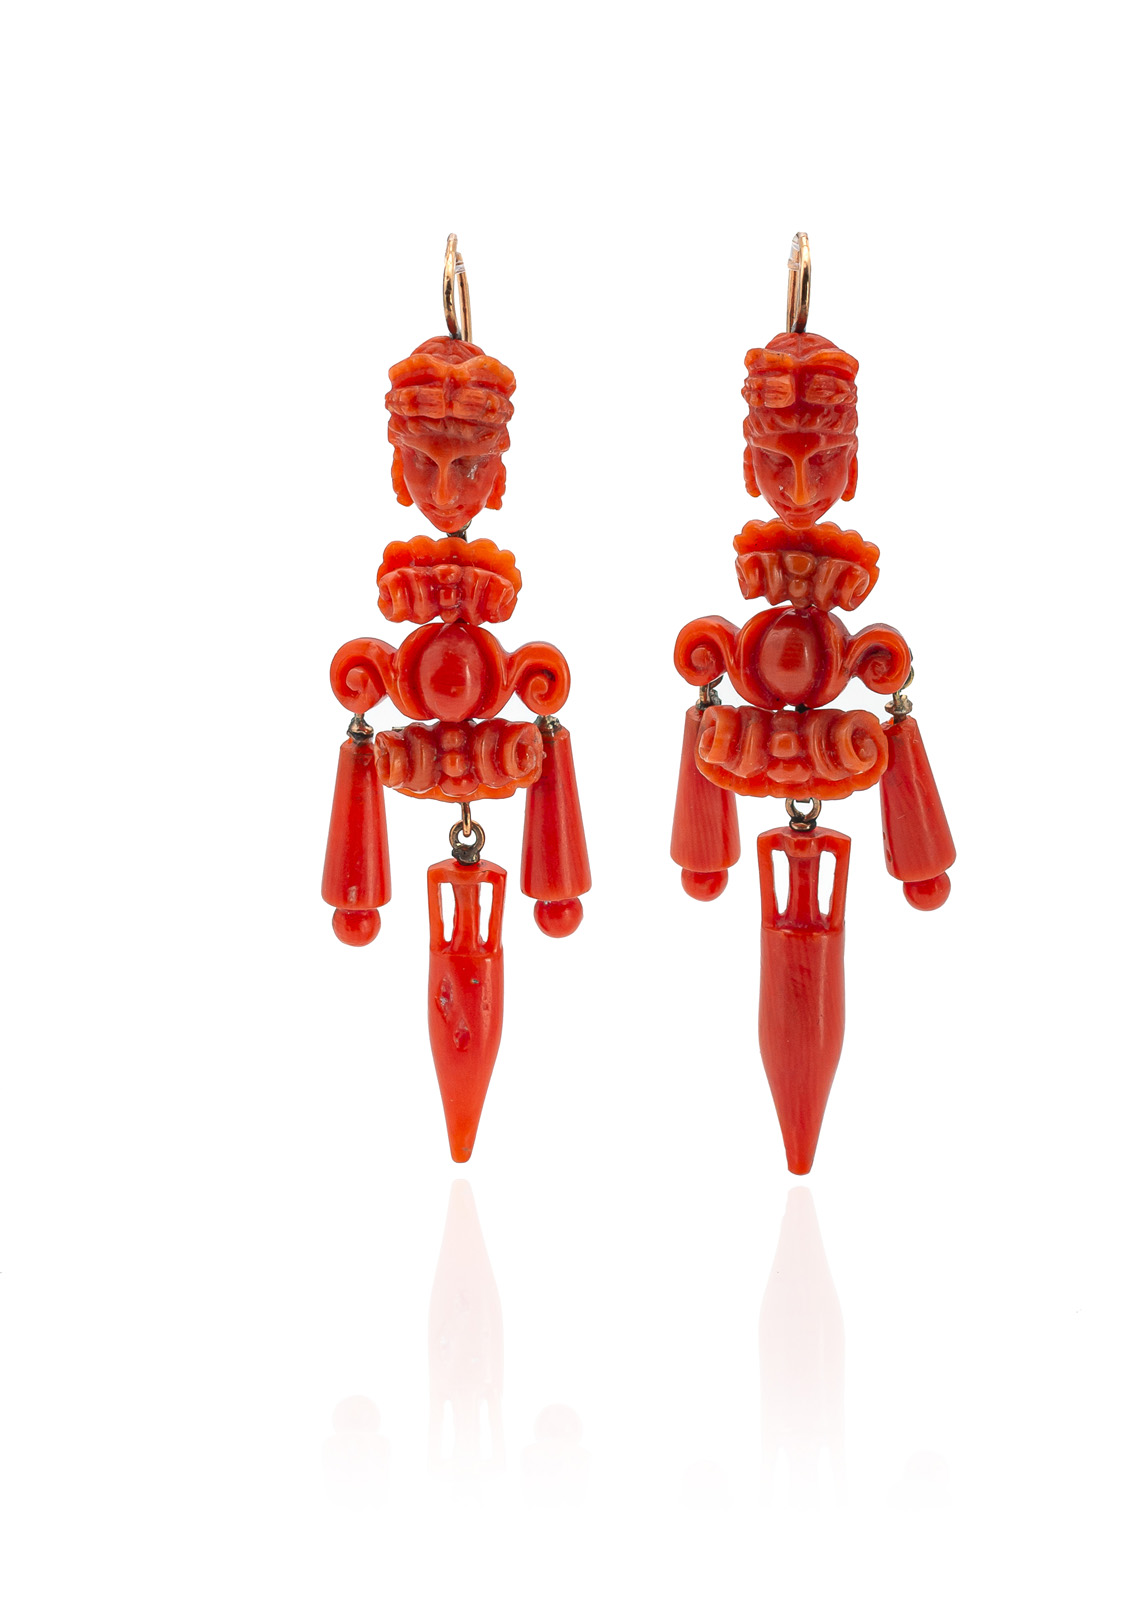 <b>A PAIR OF CORAL EARRINGS IN SHAPE OF AMPHORAS AND WOMENS' HEADS</b>